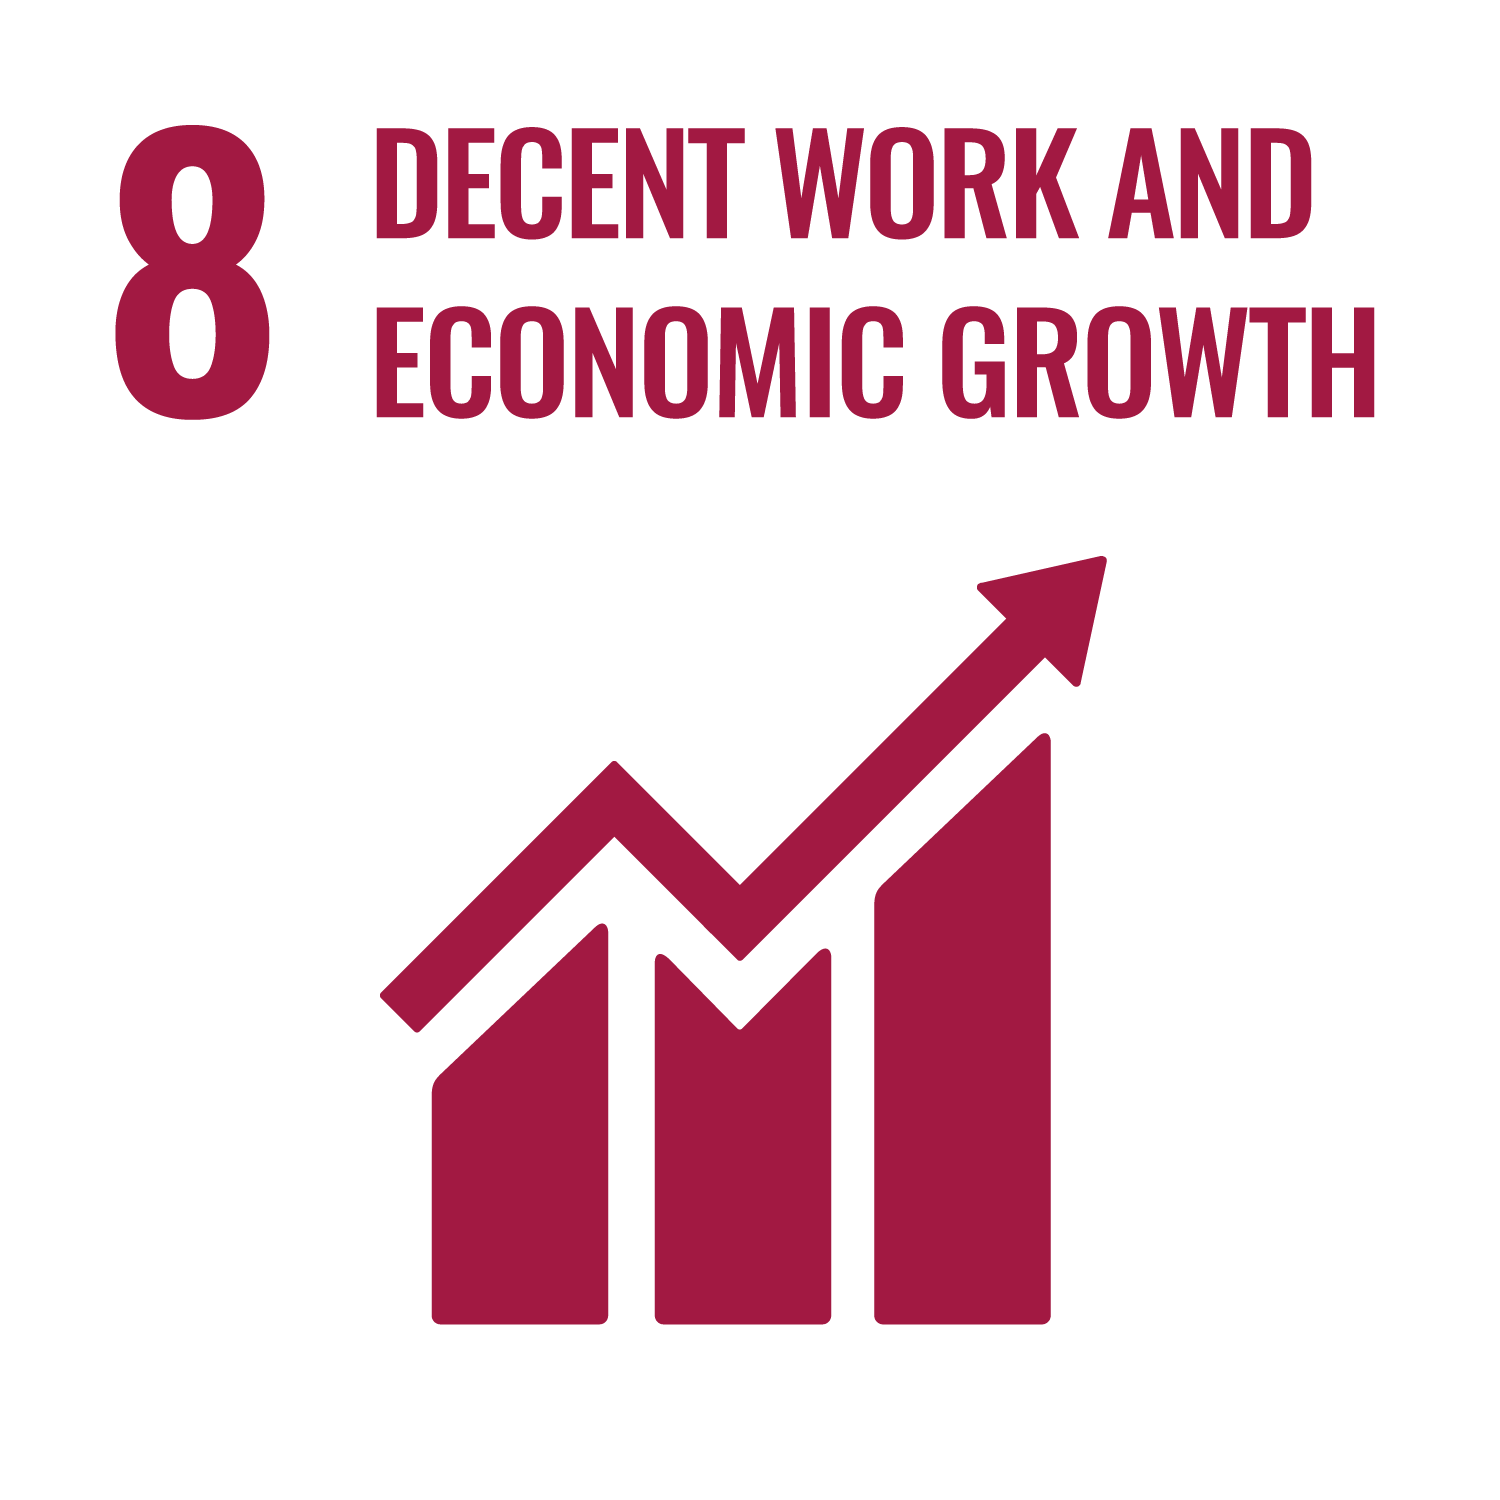 Decent jobs and economic growth - Goal 8